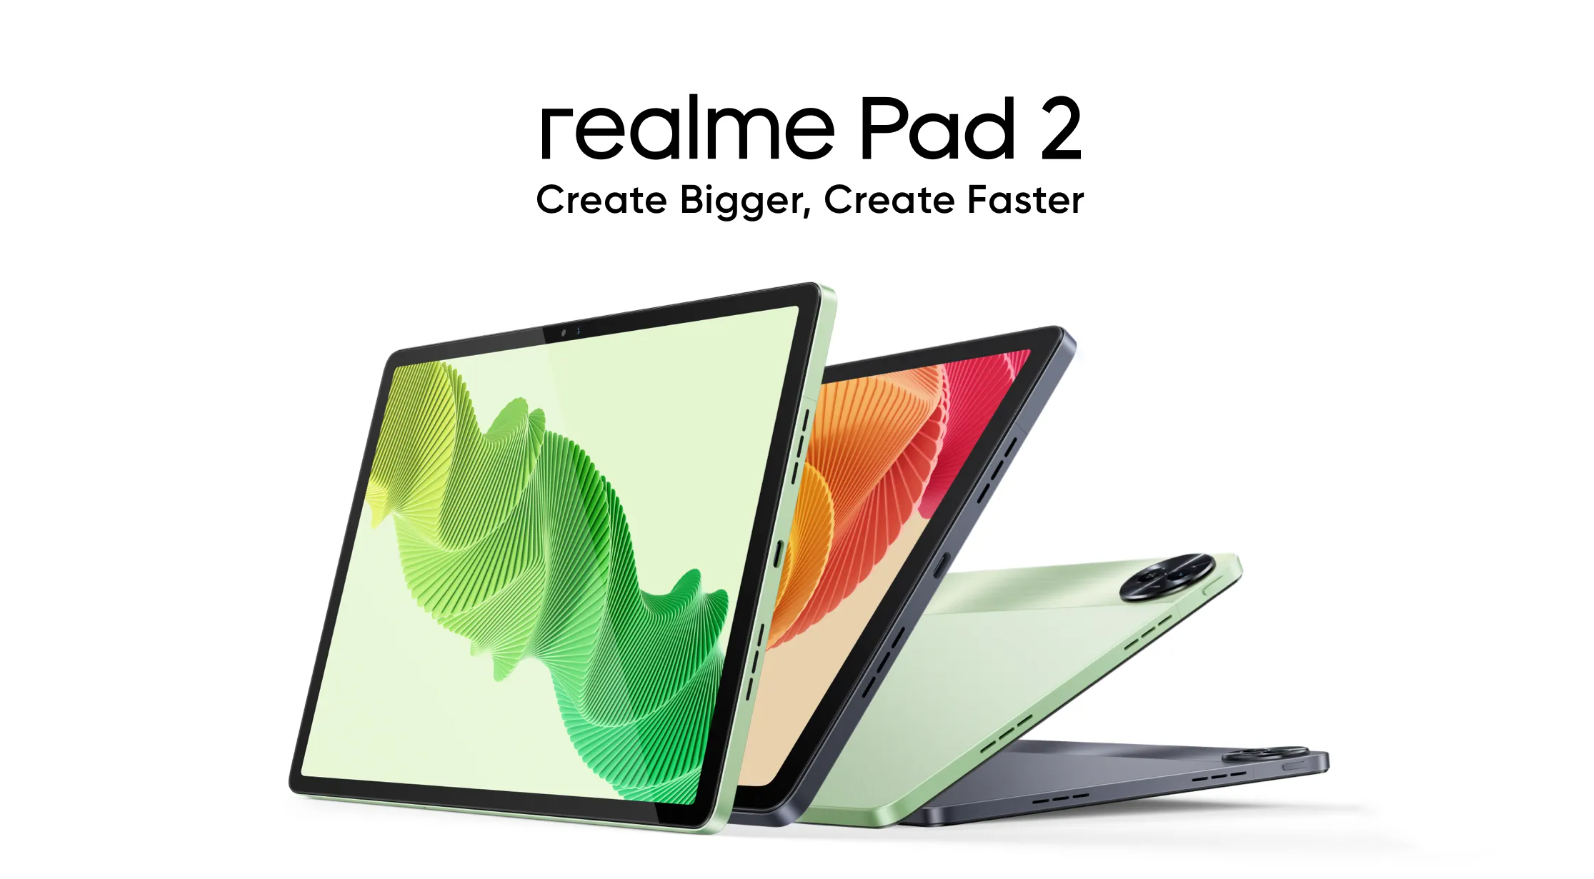 Realme Pad 2: A people-friendly budget tablet has arrived with upgrades